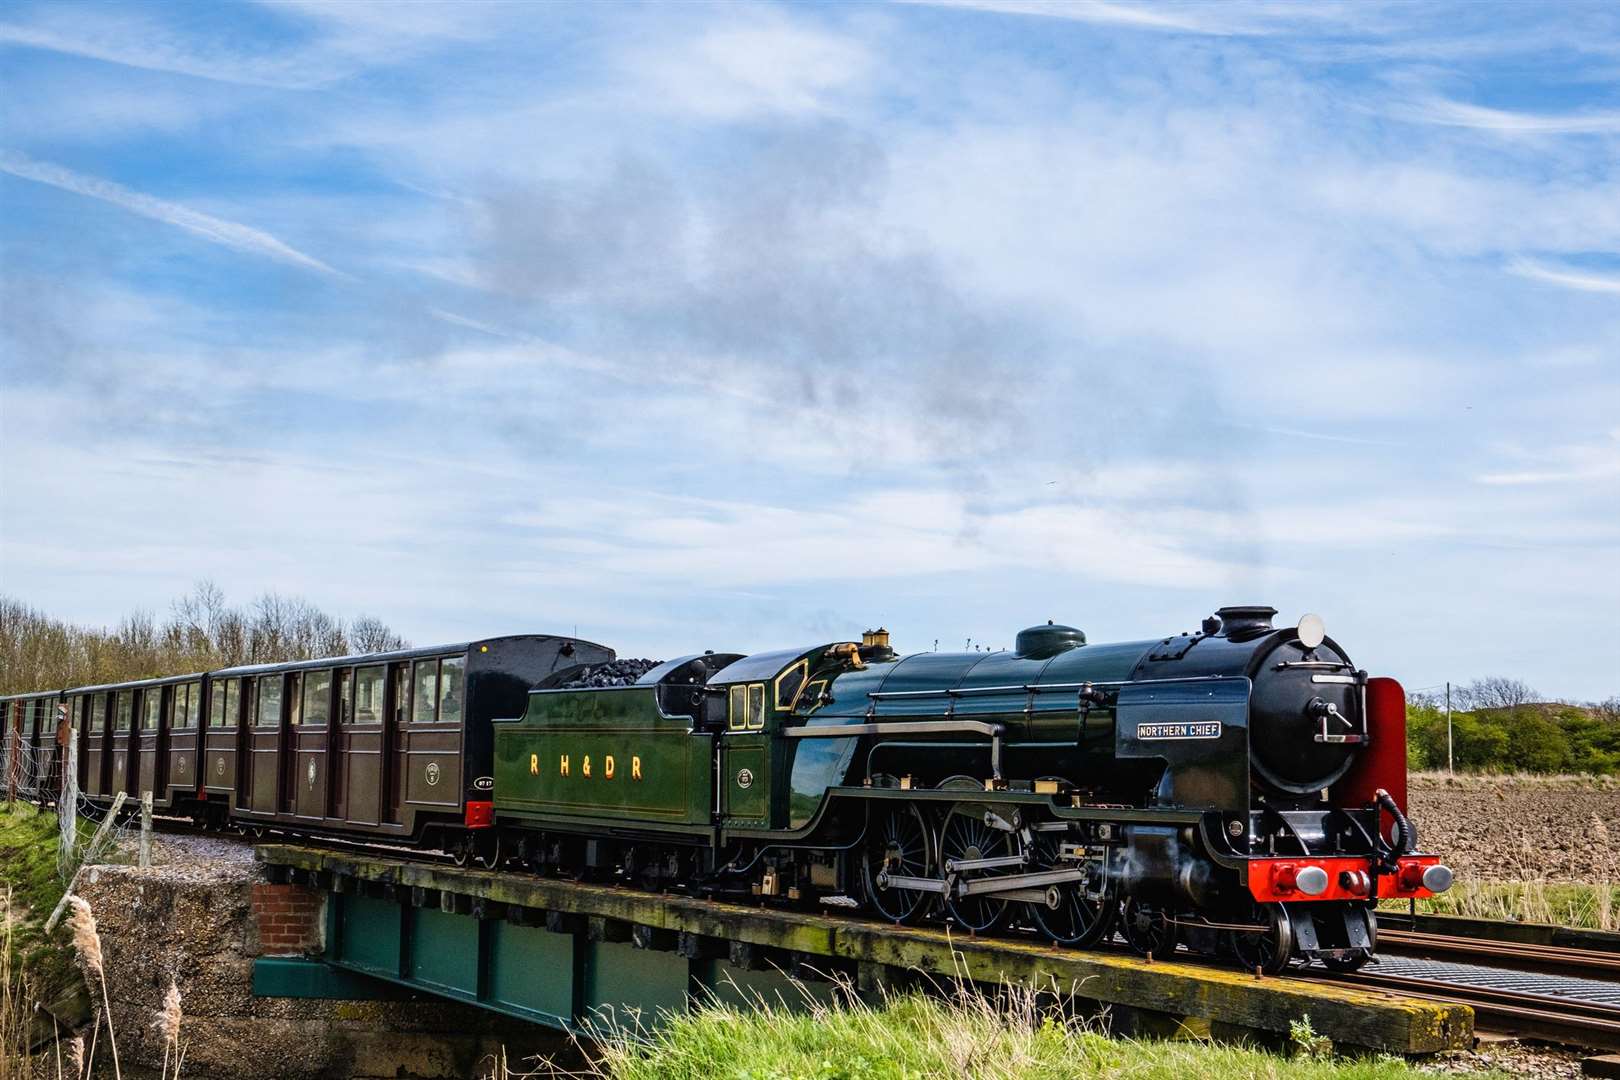 The railway has been operating for over 90 years and has a large fleet of one third size steam and diesel locomotives